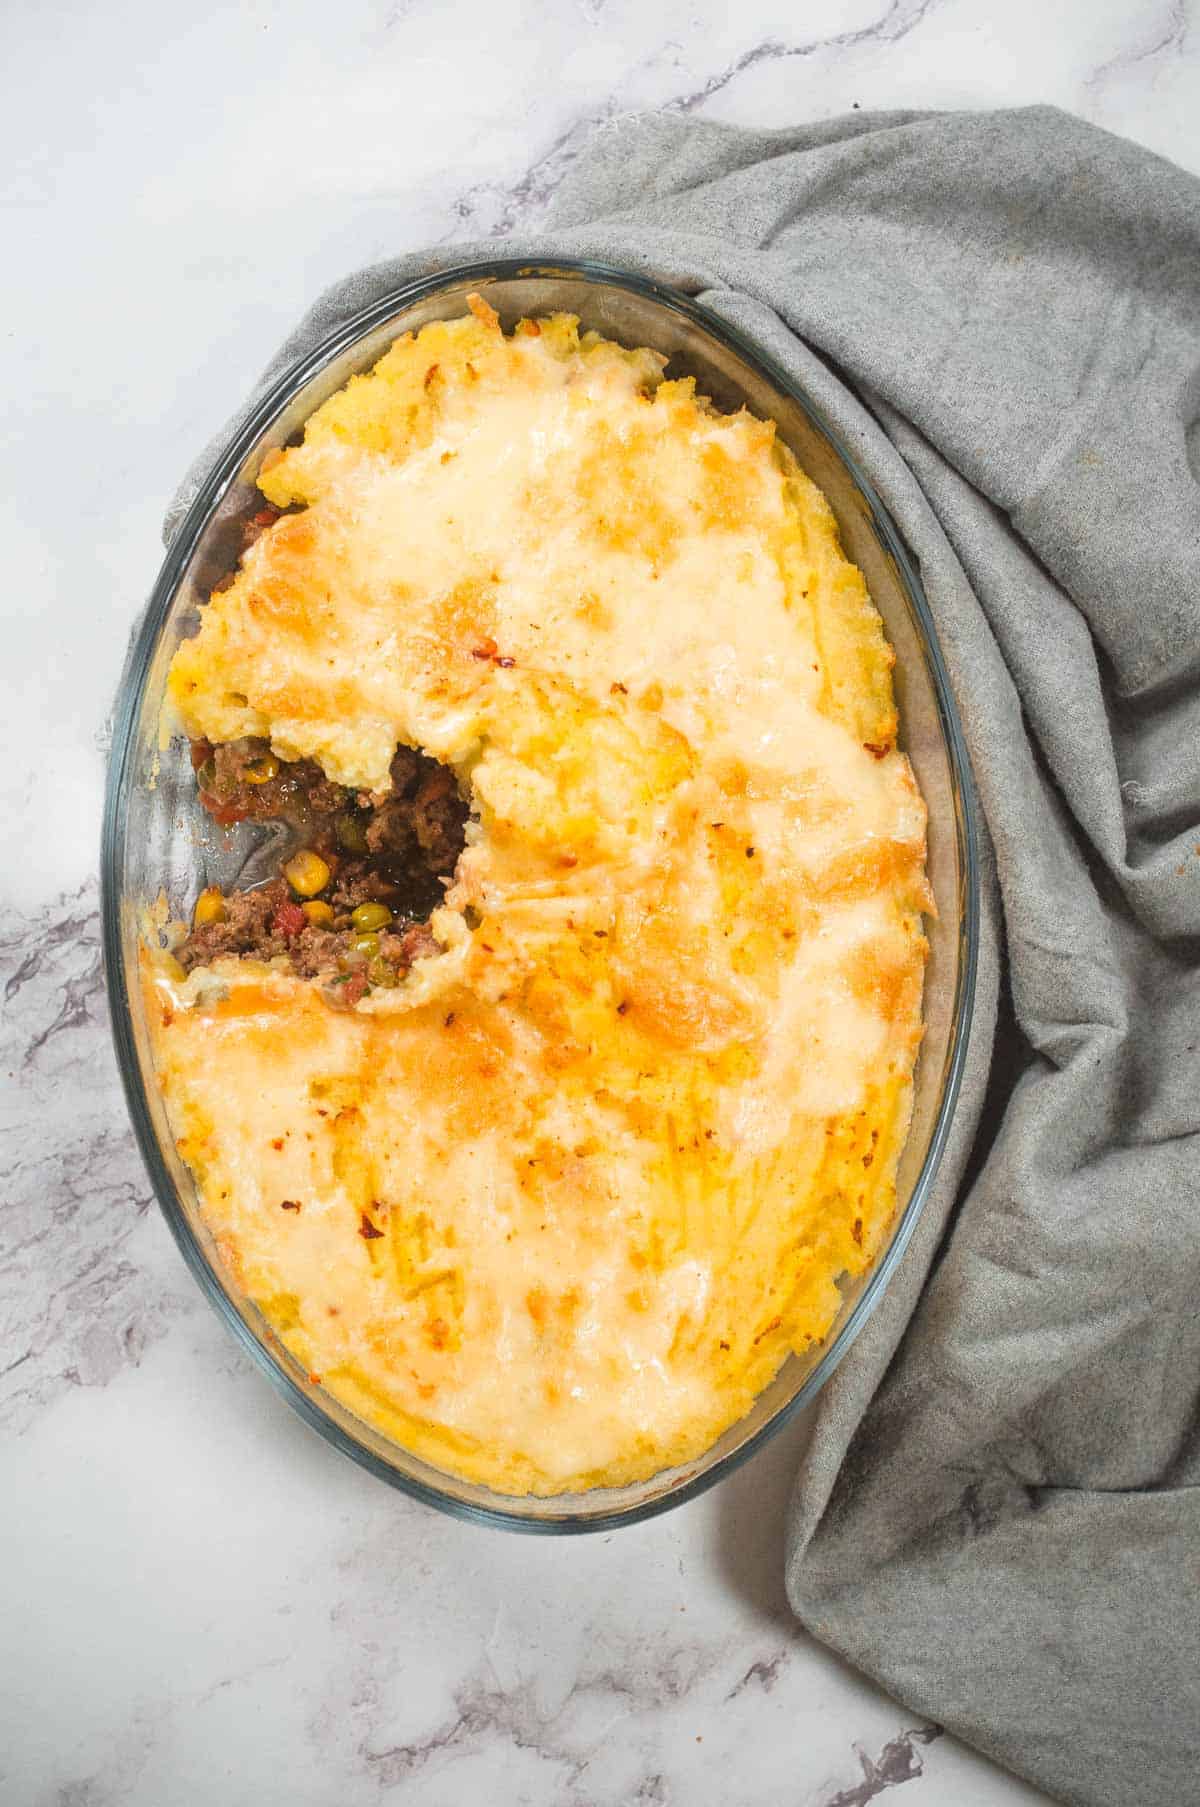 Spicy Indian shepherds pie right out of the oven. 